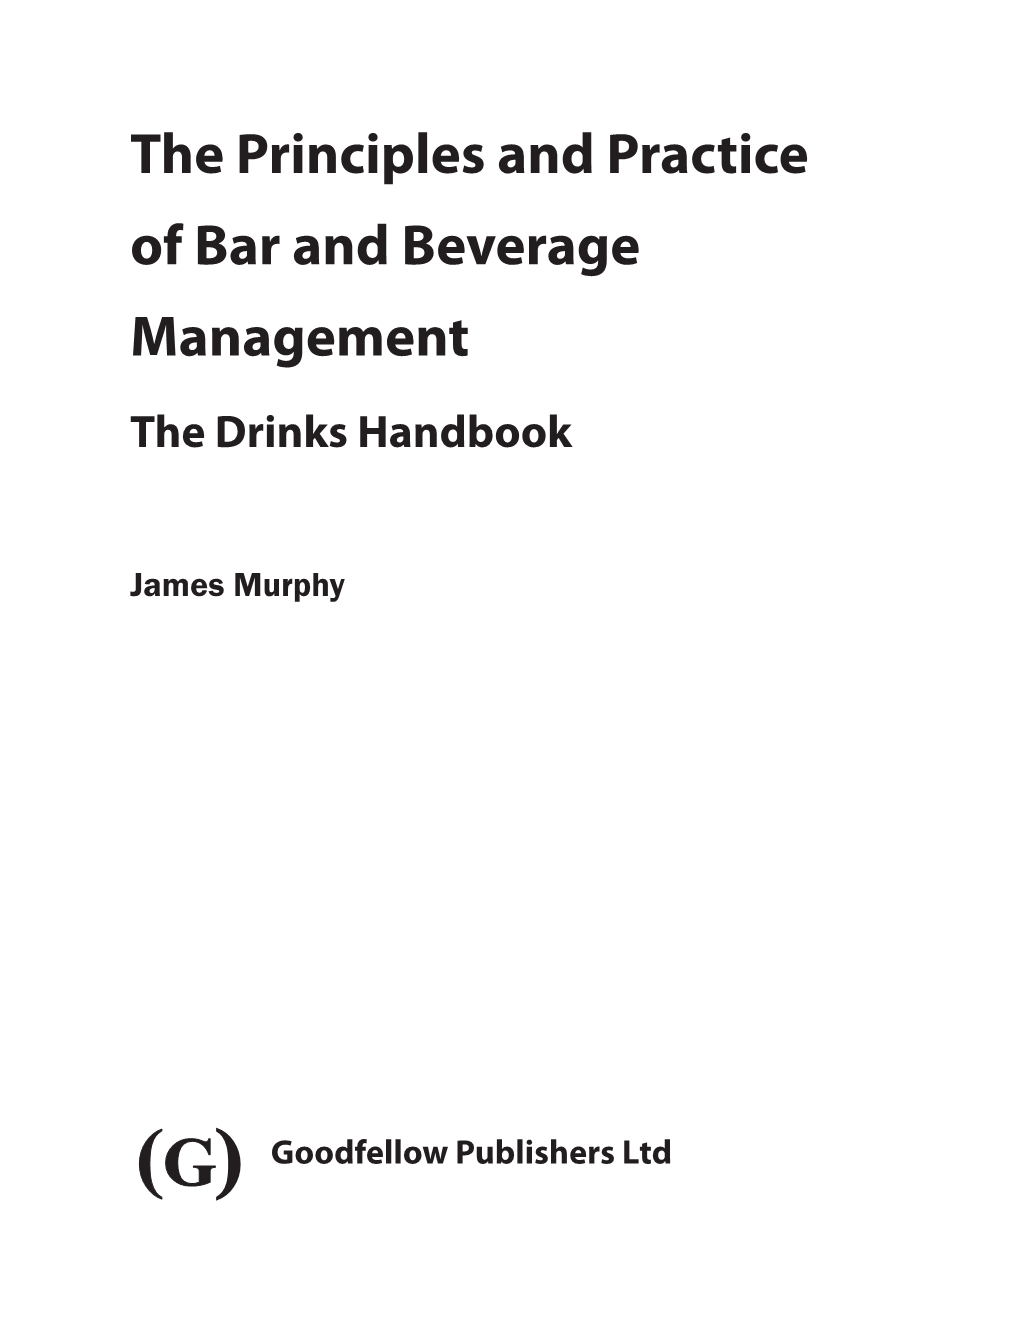 The Principles and Practice of Bar and Beverage Management the Drinks Handbook